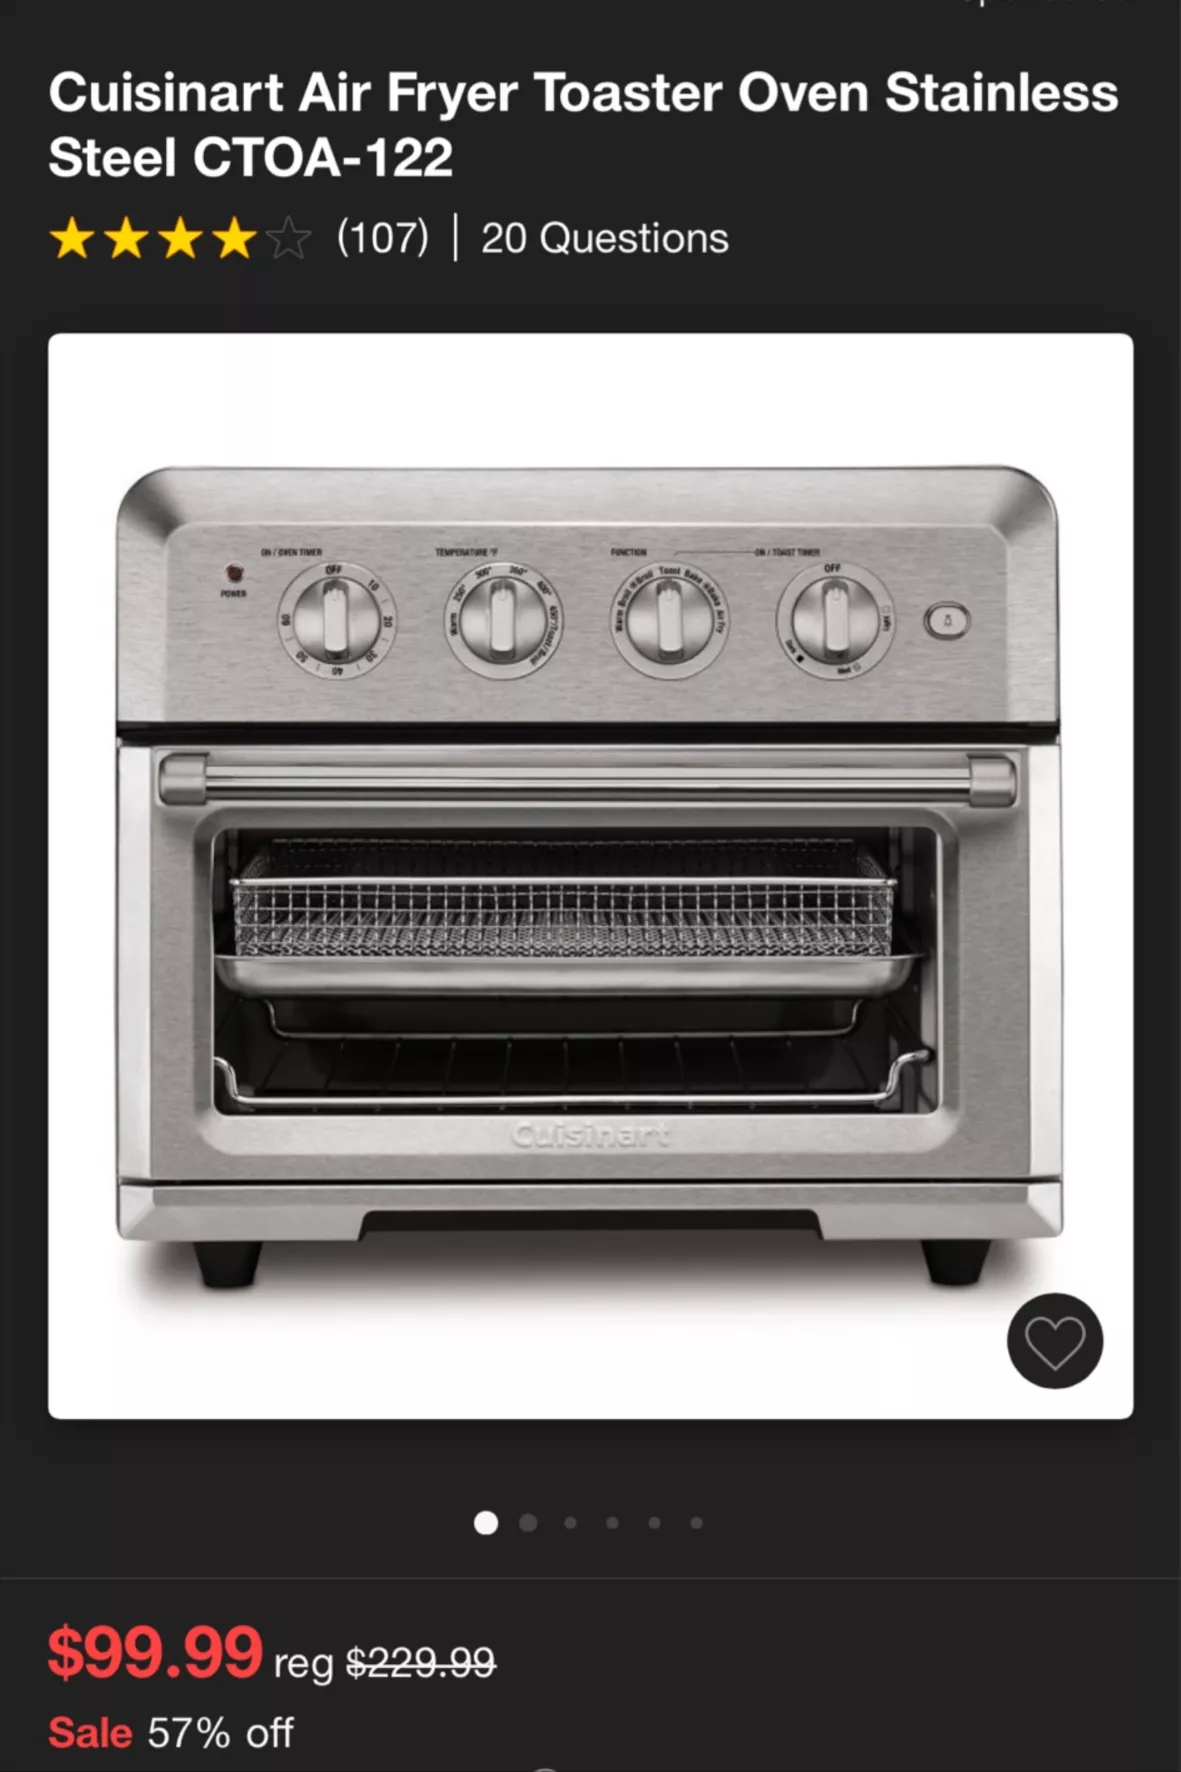 Cuisinart CTOA-122 Airfryer & Convection Toaster Oven (Stainless